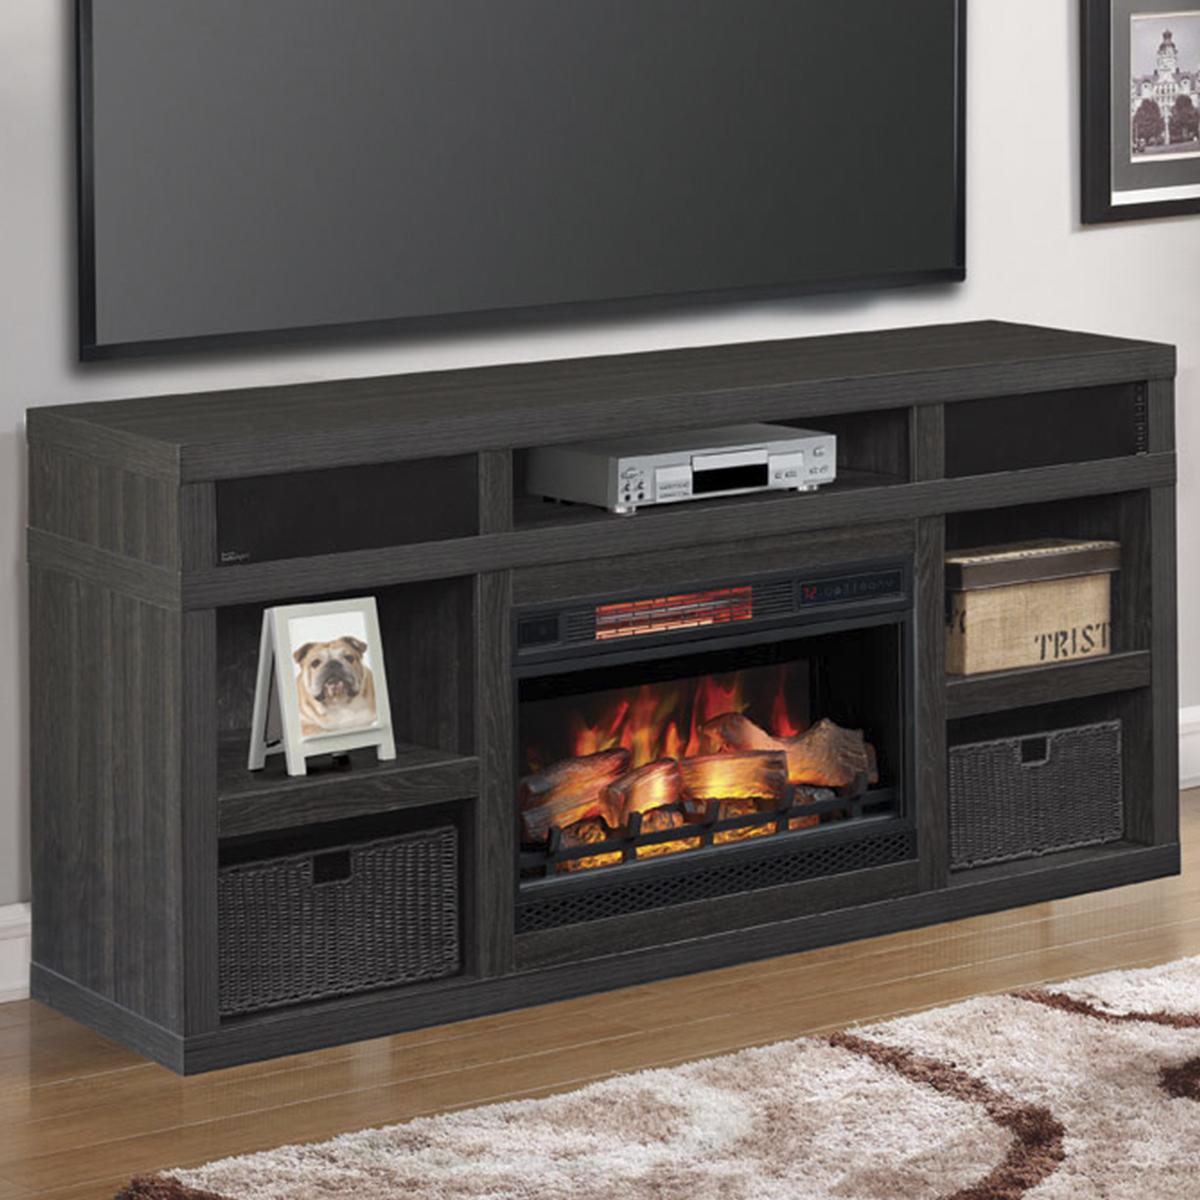 40 Electric Fireplace Awesome Fabio Flames Greatlin 64" Tv Stand In Black Walnut